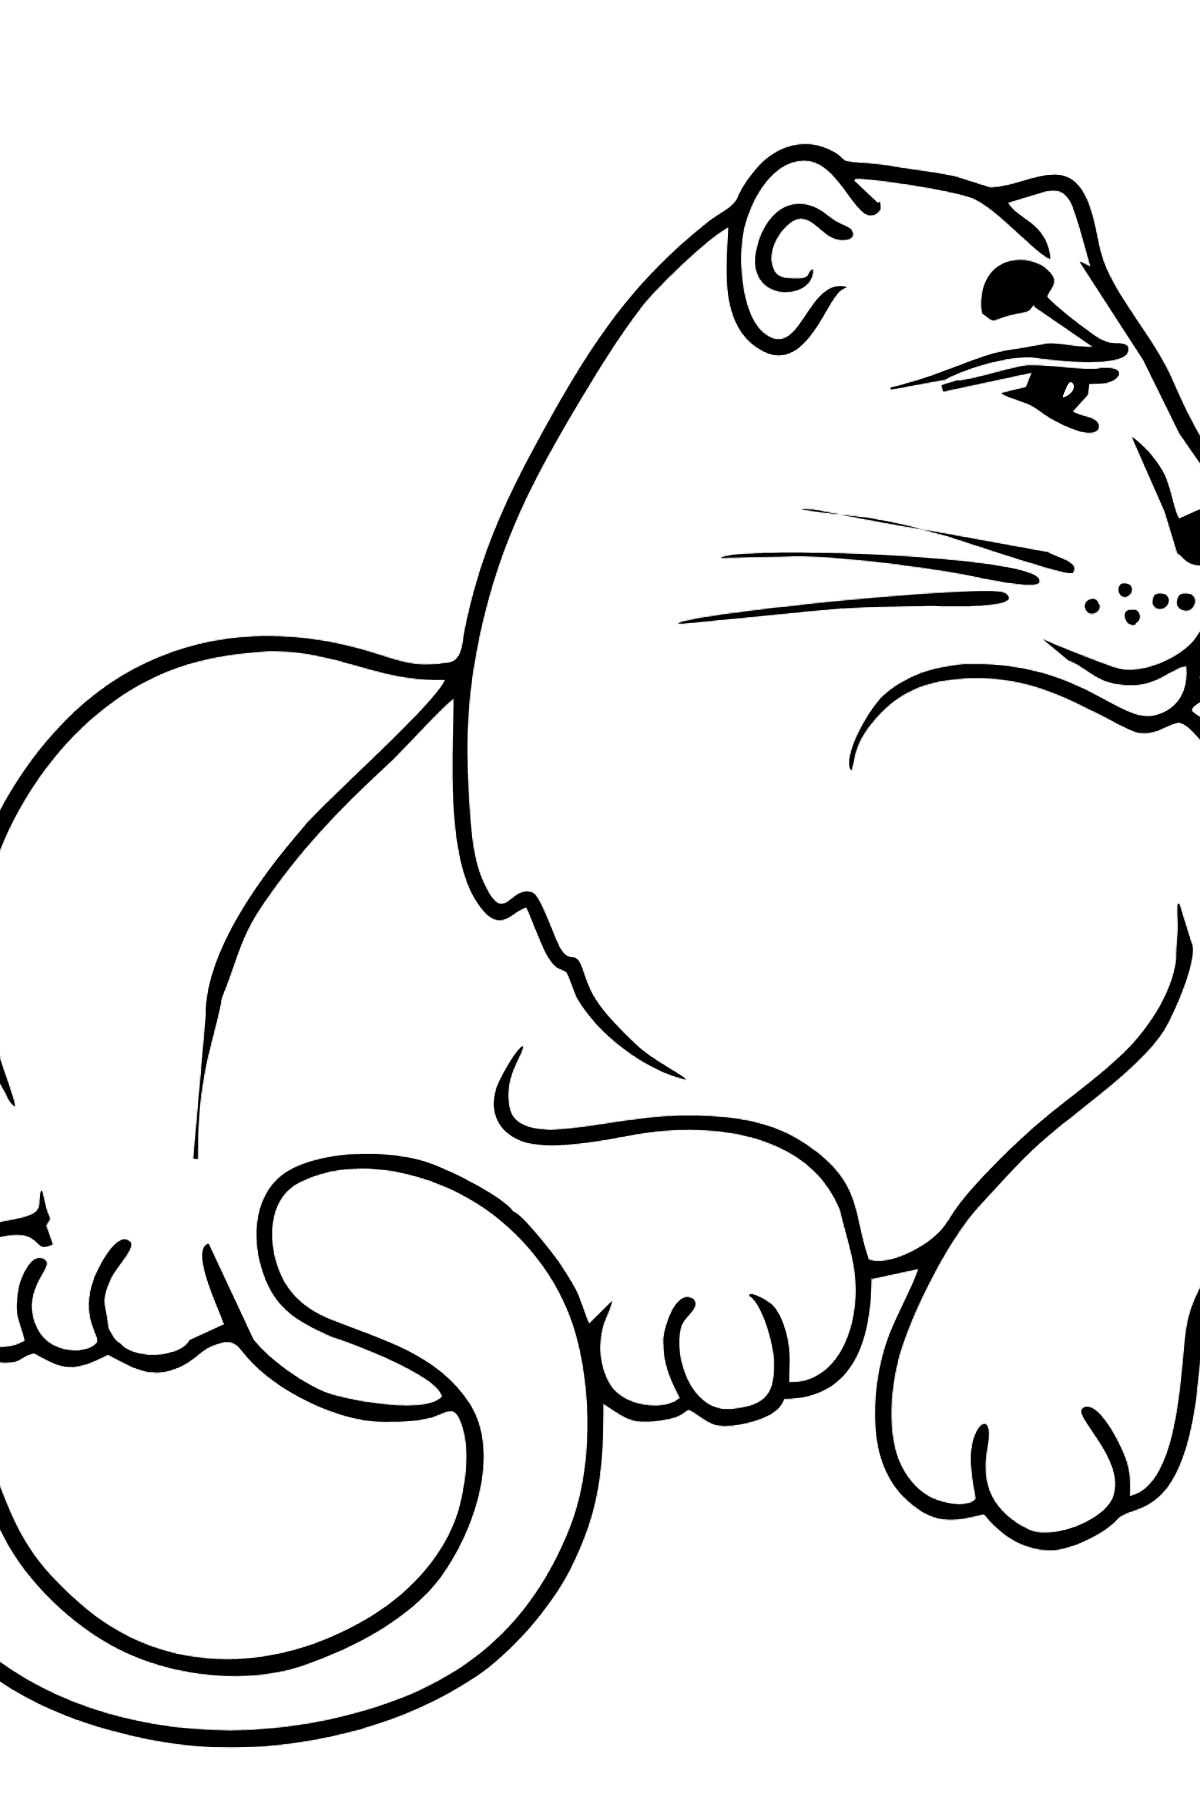 Panther coloring page - Coloring Pages for Kids